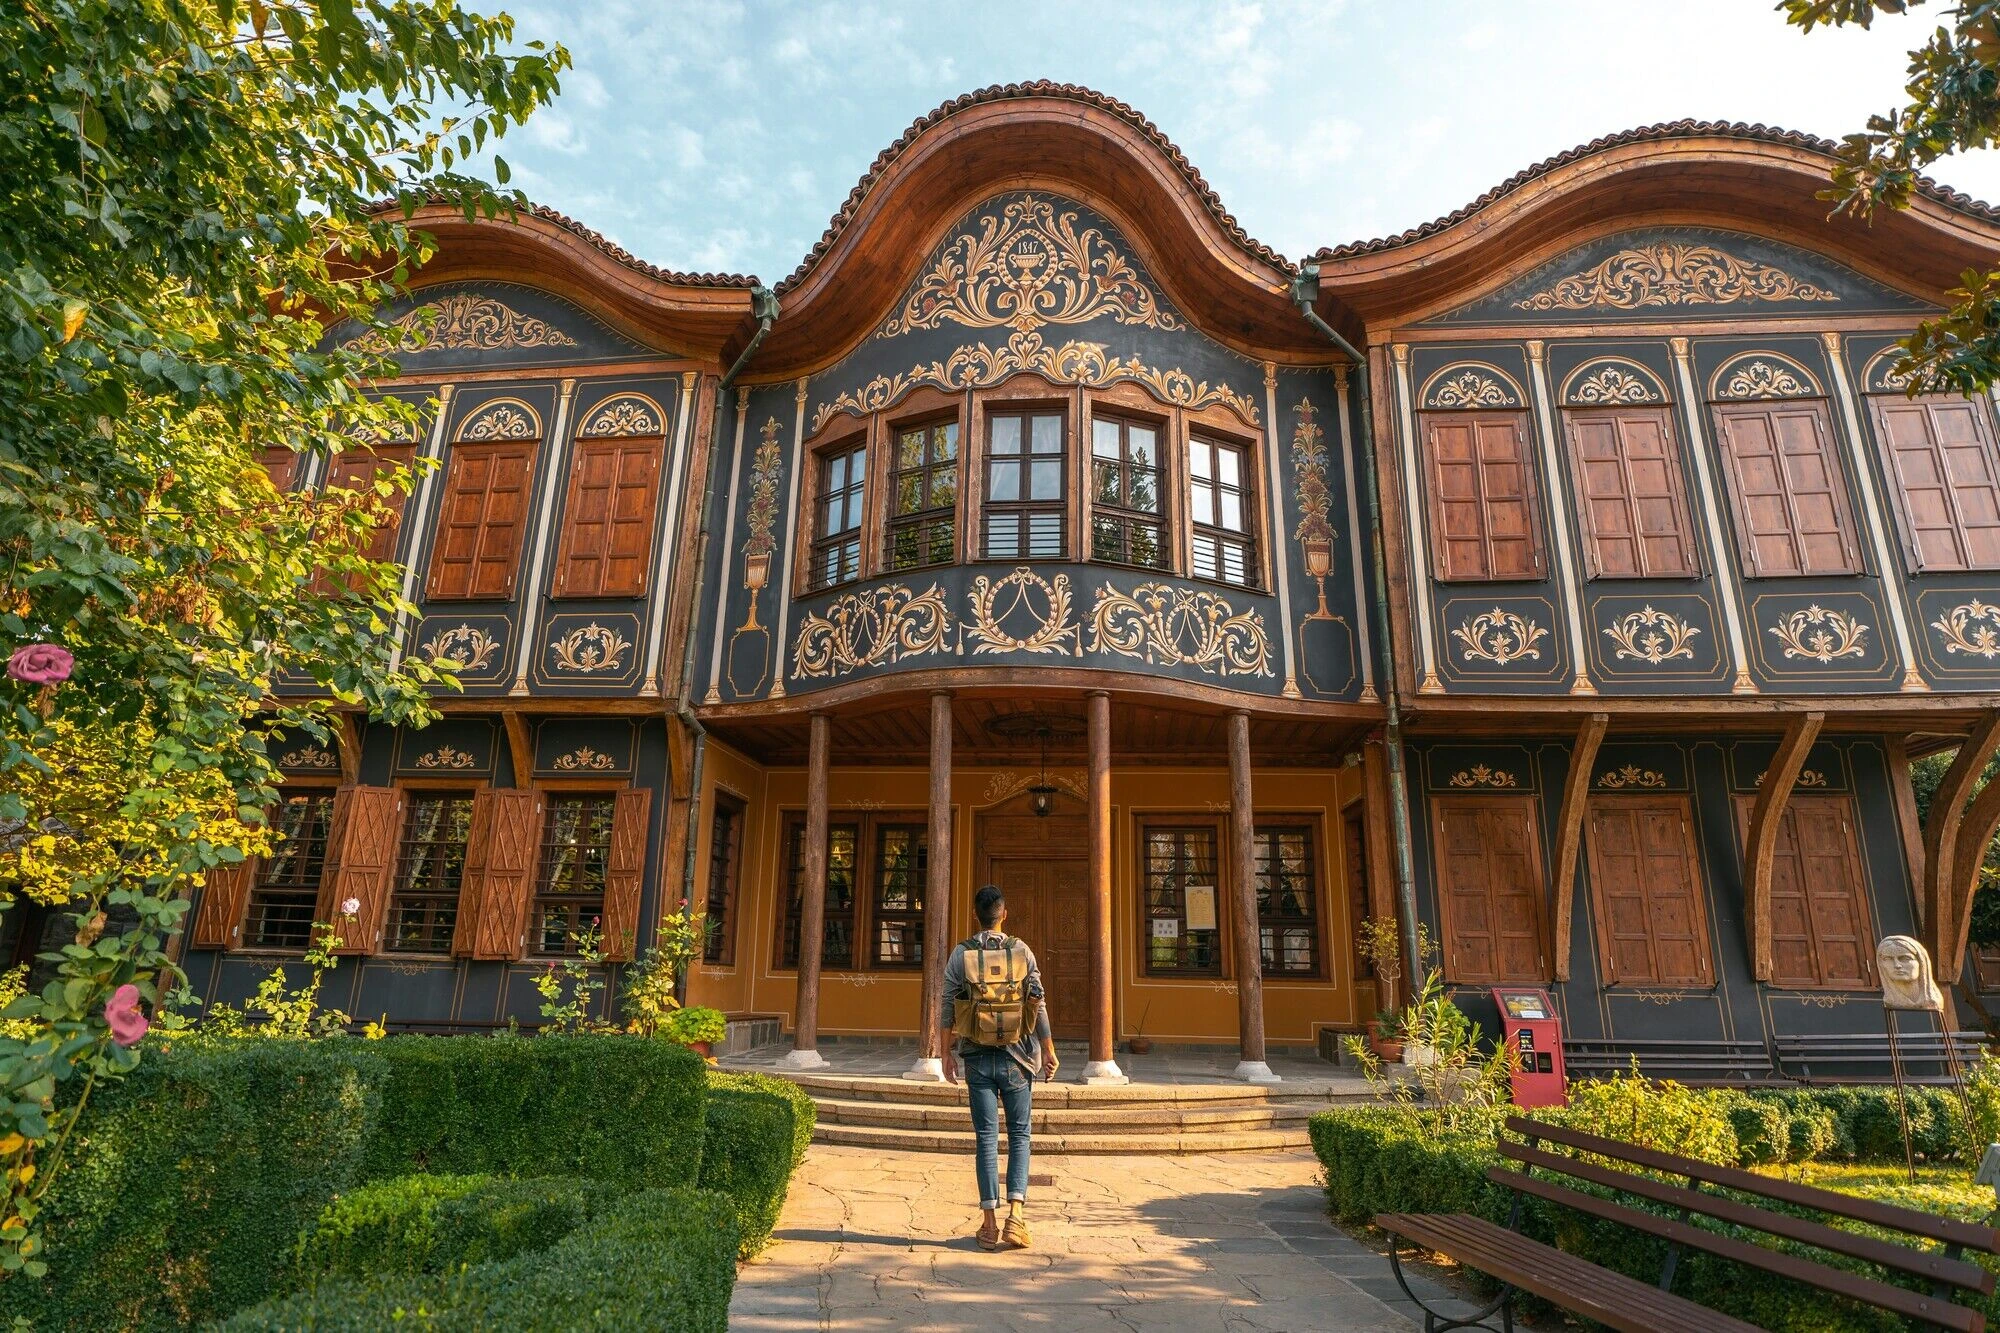 11 Awesome Things to Do in Plovdiv for First-Timers - A Complete Guide to Backpacking Plovdiv